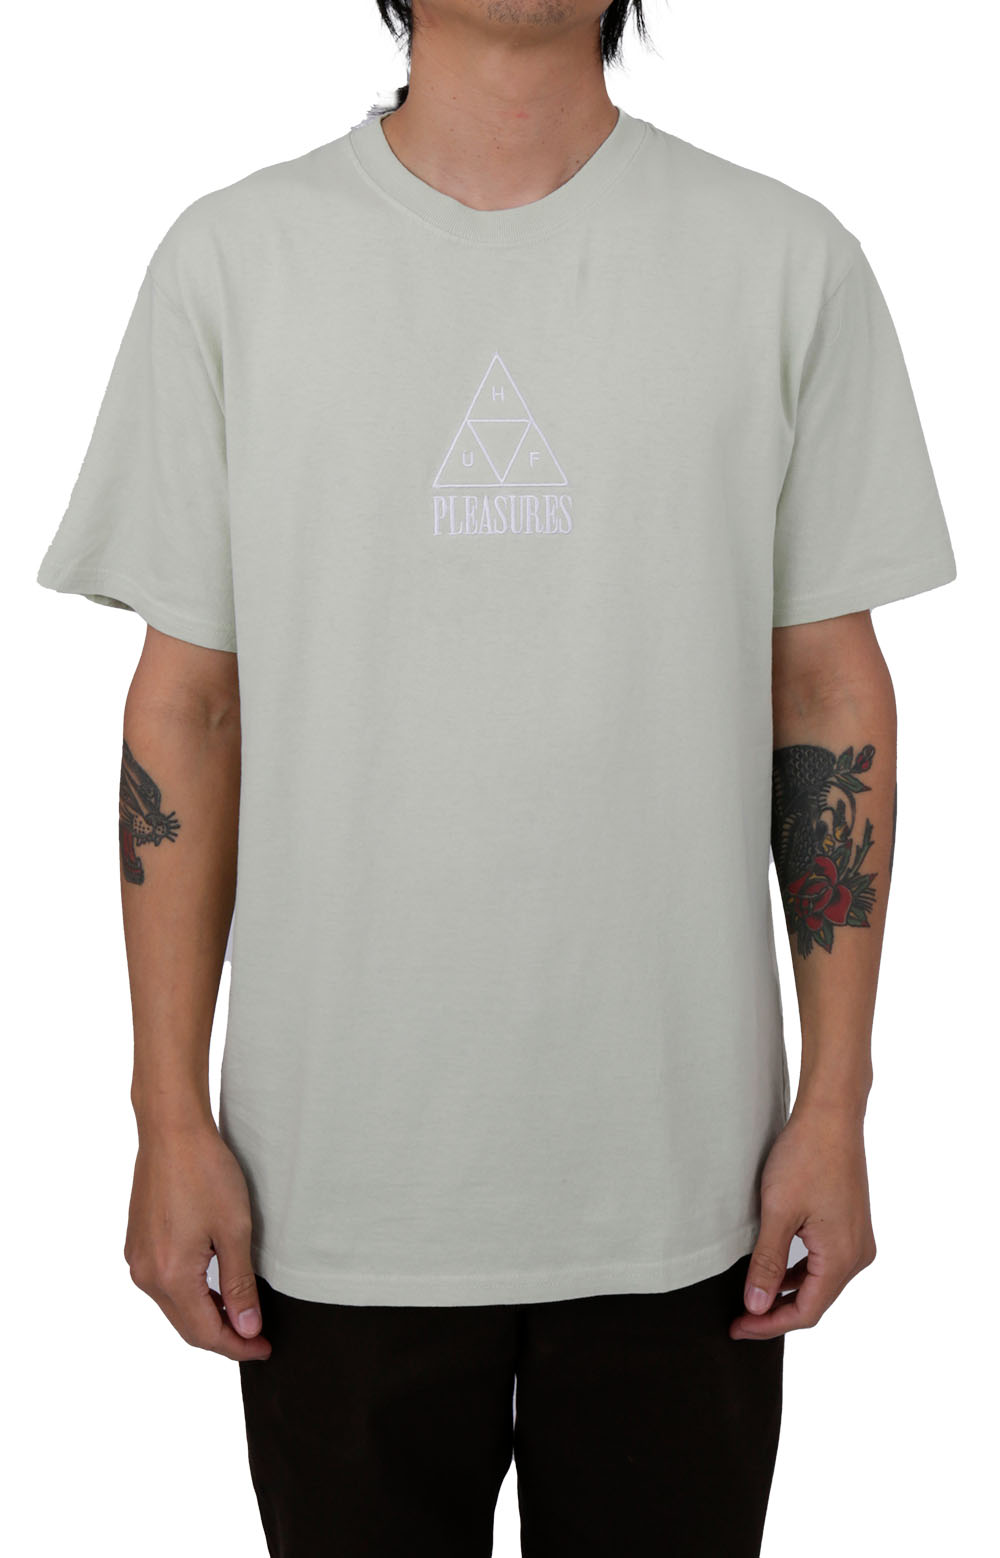 x Pleasures Dyed T-Shirt - Green